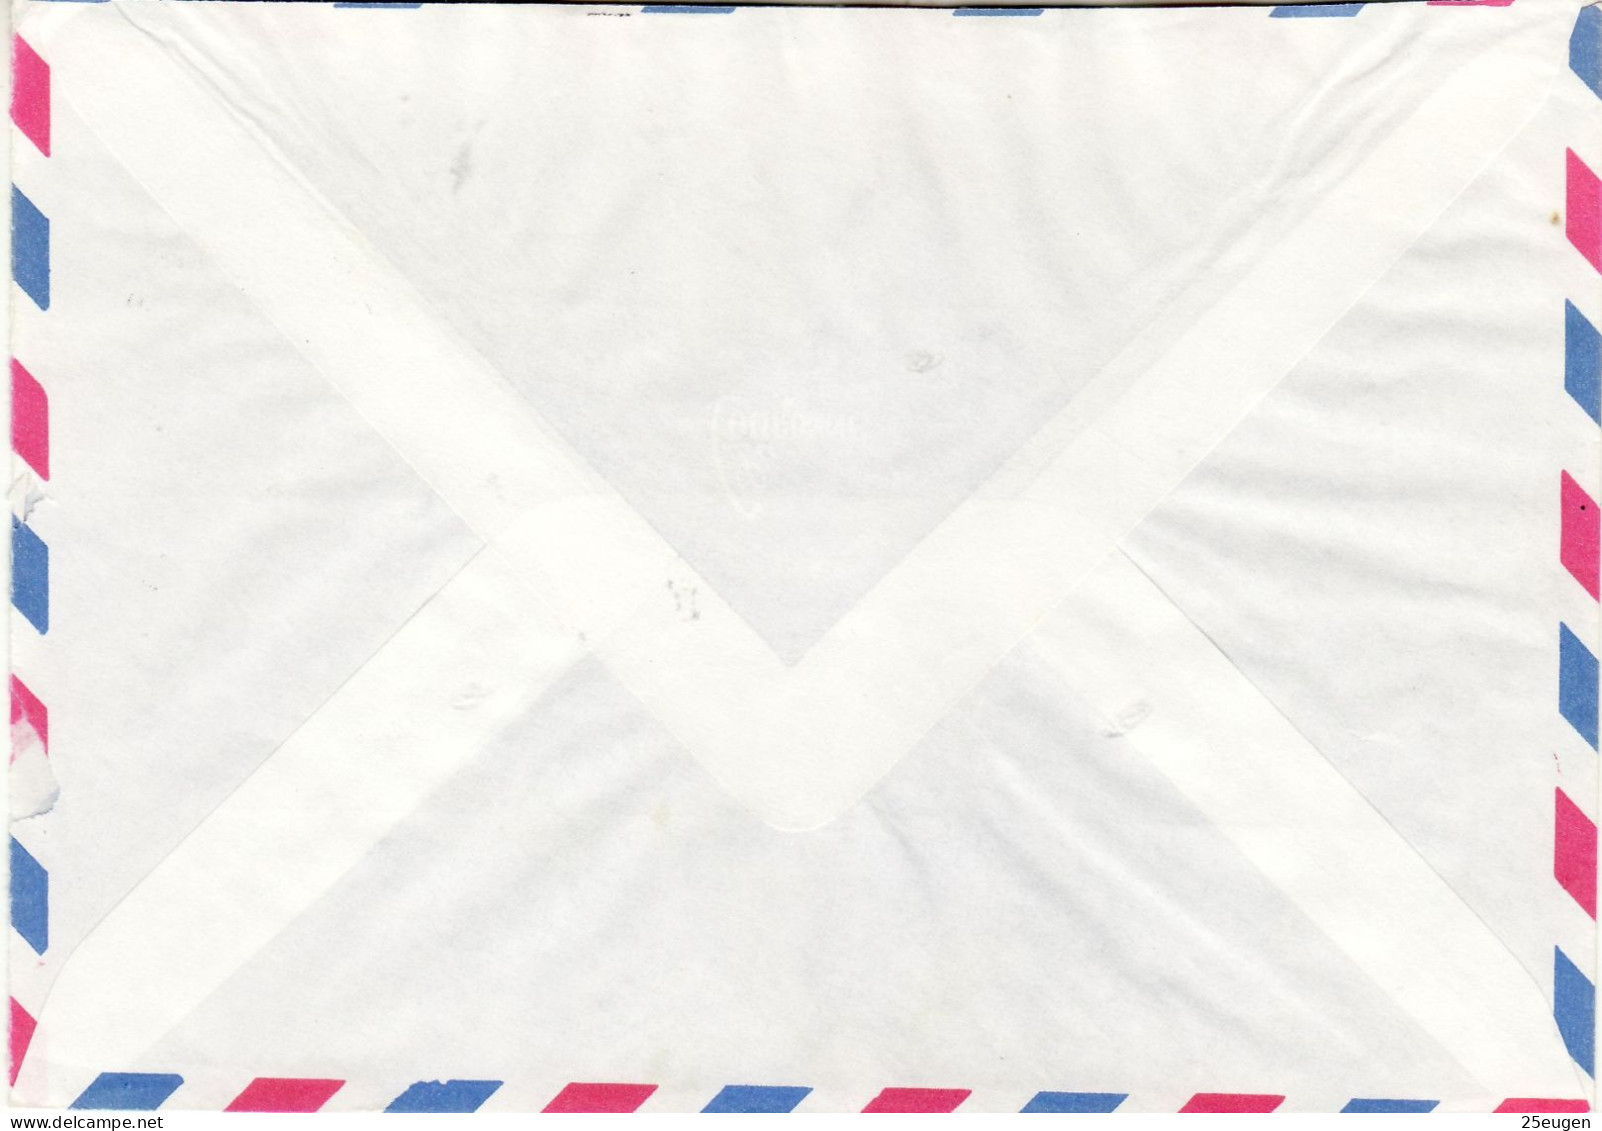 NEW CALEDONIA 1987 AIRMAIL LETTER SENT FROM BOURAIL TO TOULON - Covers & Documents